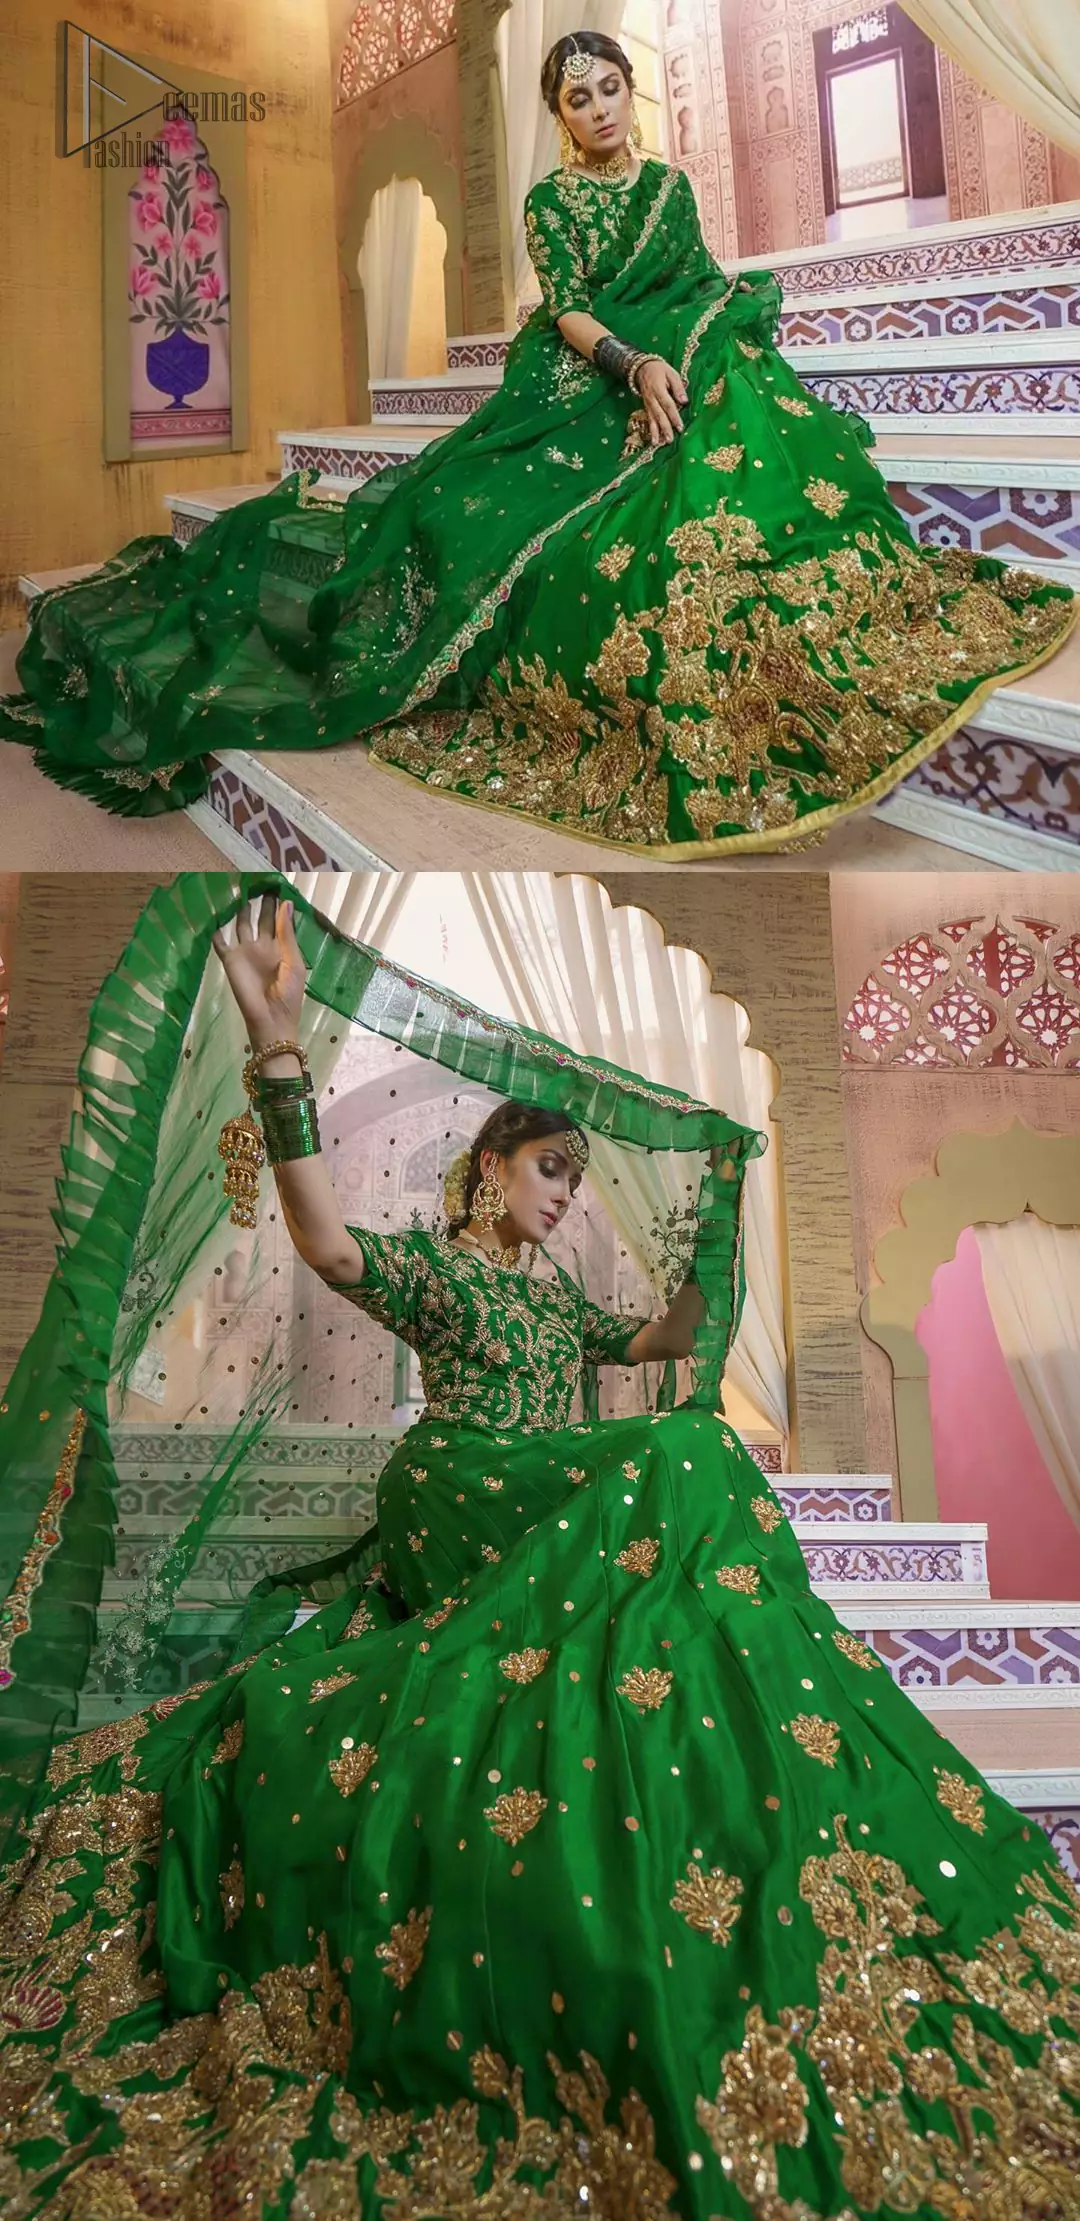 Nothing speaks of femininity and class louder than this green mehndi outfits for bridesmaids. This beautiful outfit comes with a green lehenga which is beautifully embellished with motifs, sprinkled with sequins and it finished with a thick embellished border. The blouse is breathtakingly ornamented with floral bootis which covers every inch of the blouse. The dupatta incorporates beautifully designed scalloped borders and frilled on all four sides. The kora, dabka, tilla, sequins and pearls work are done in the shades of golden.